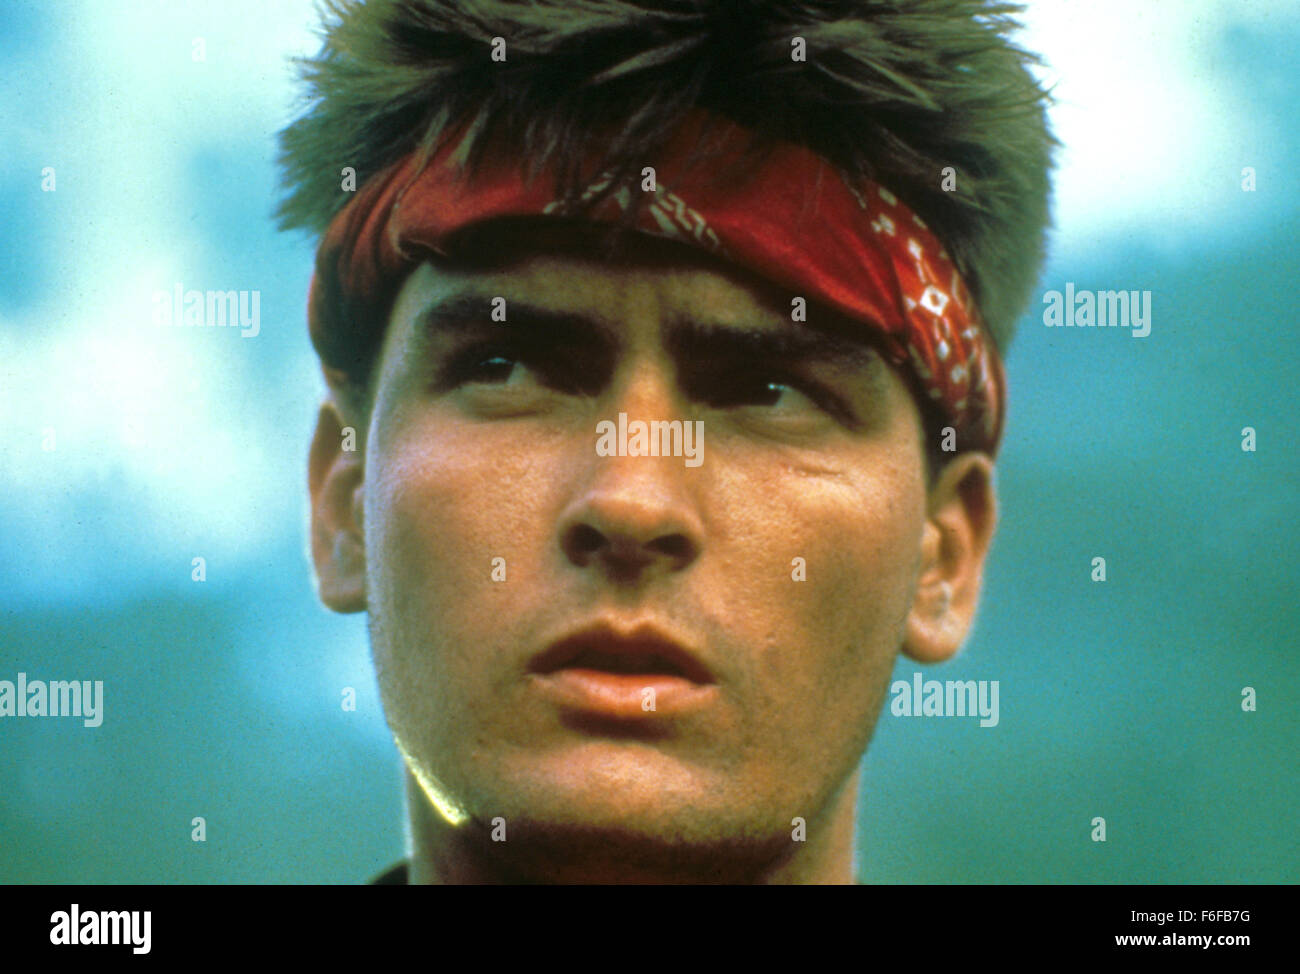 Tom berenger major league hi-res stock photography and images - Alamy